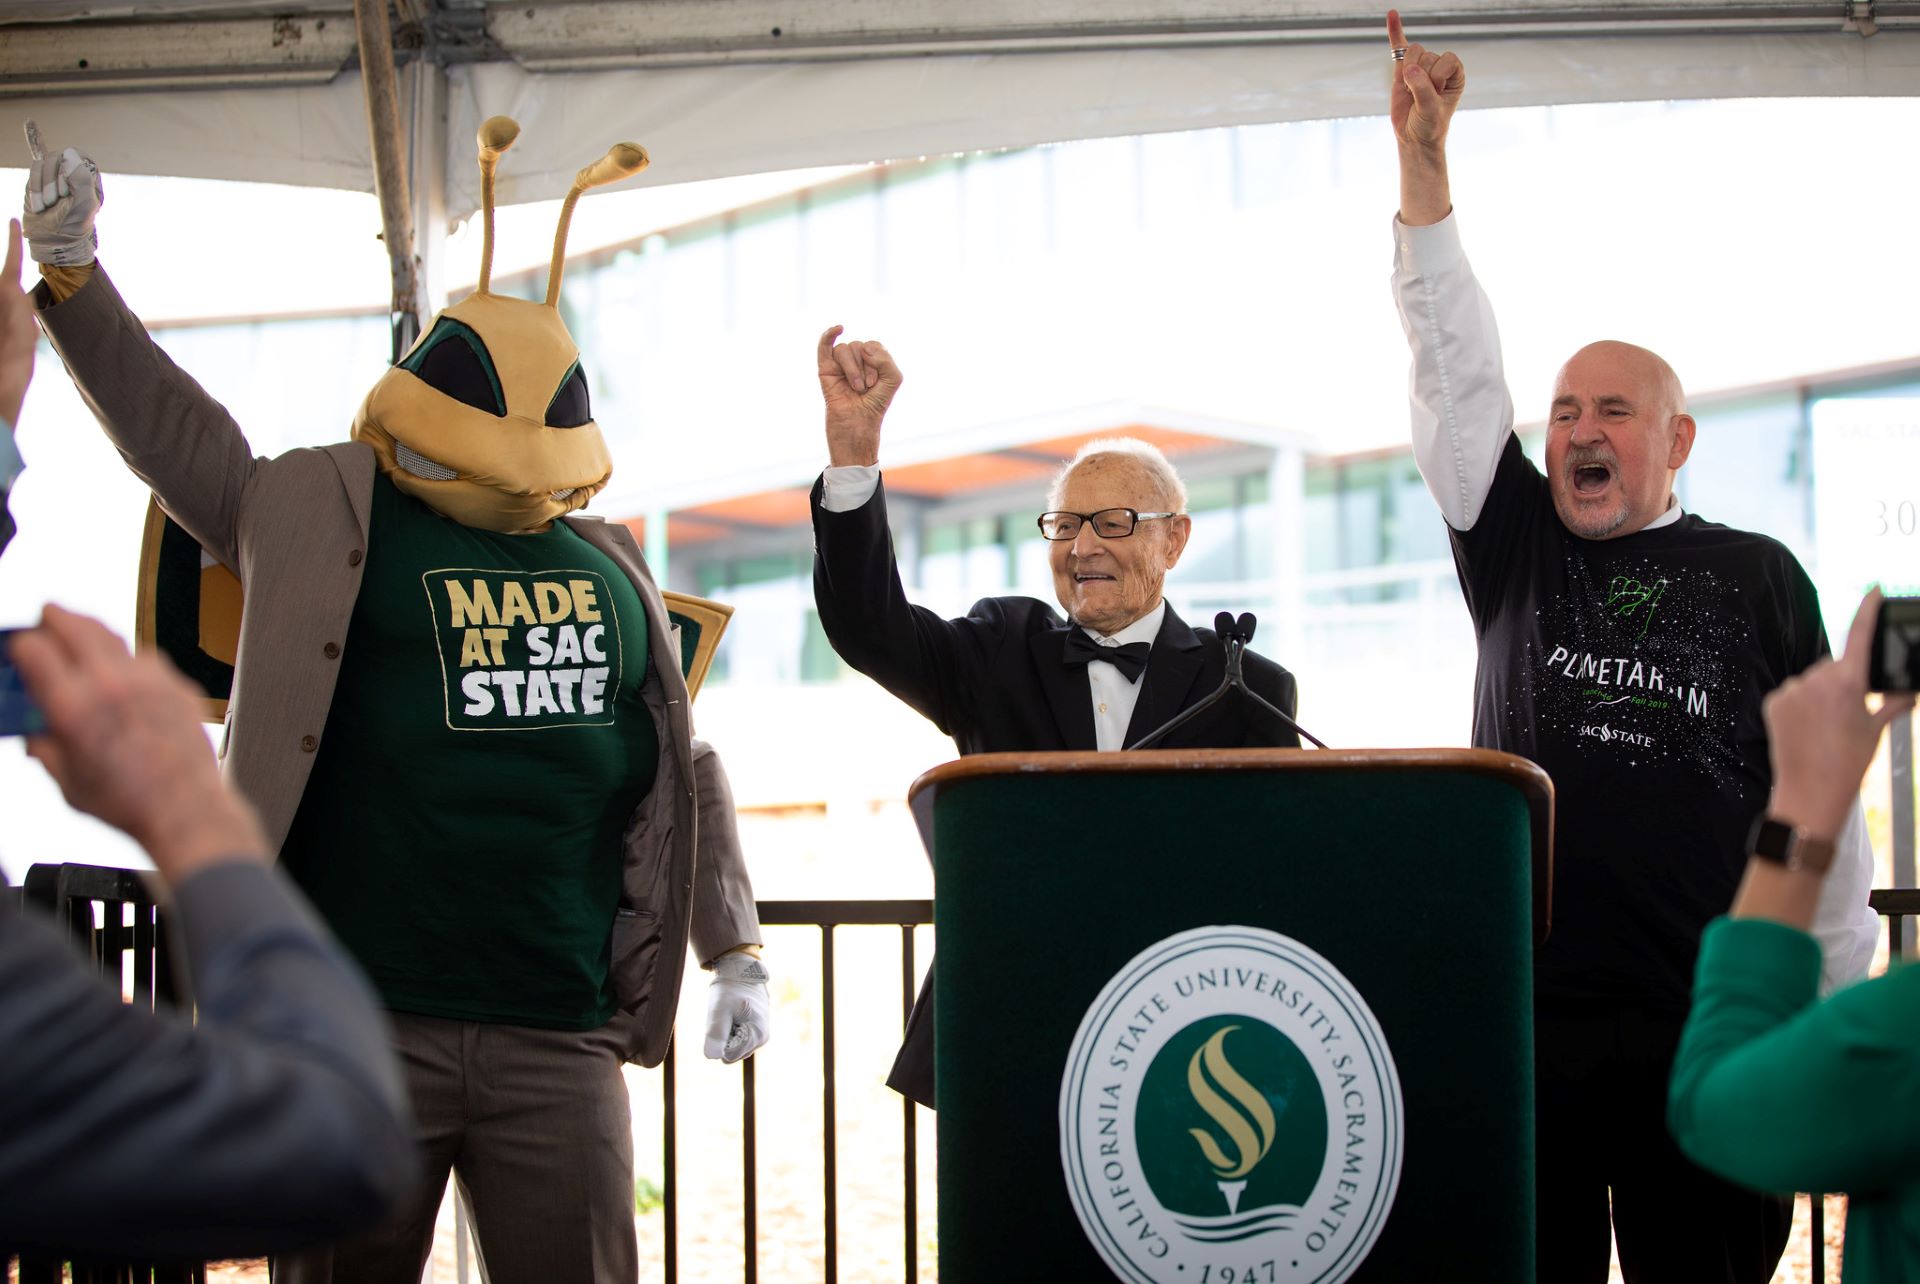 Sacramento State President Robert S. Nelsen, right, and Ernest E. Tschannen celebrate at the official opening of the Science Complex that bears Tschannen's name. (Sacramento State/Jessica Vernone)